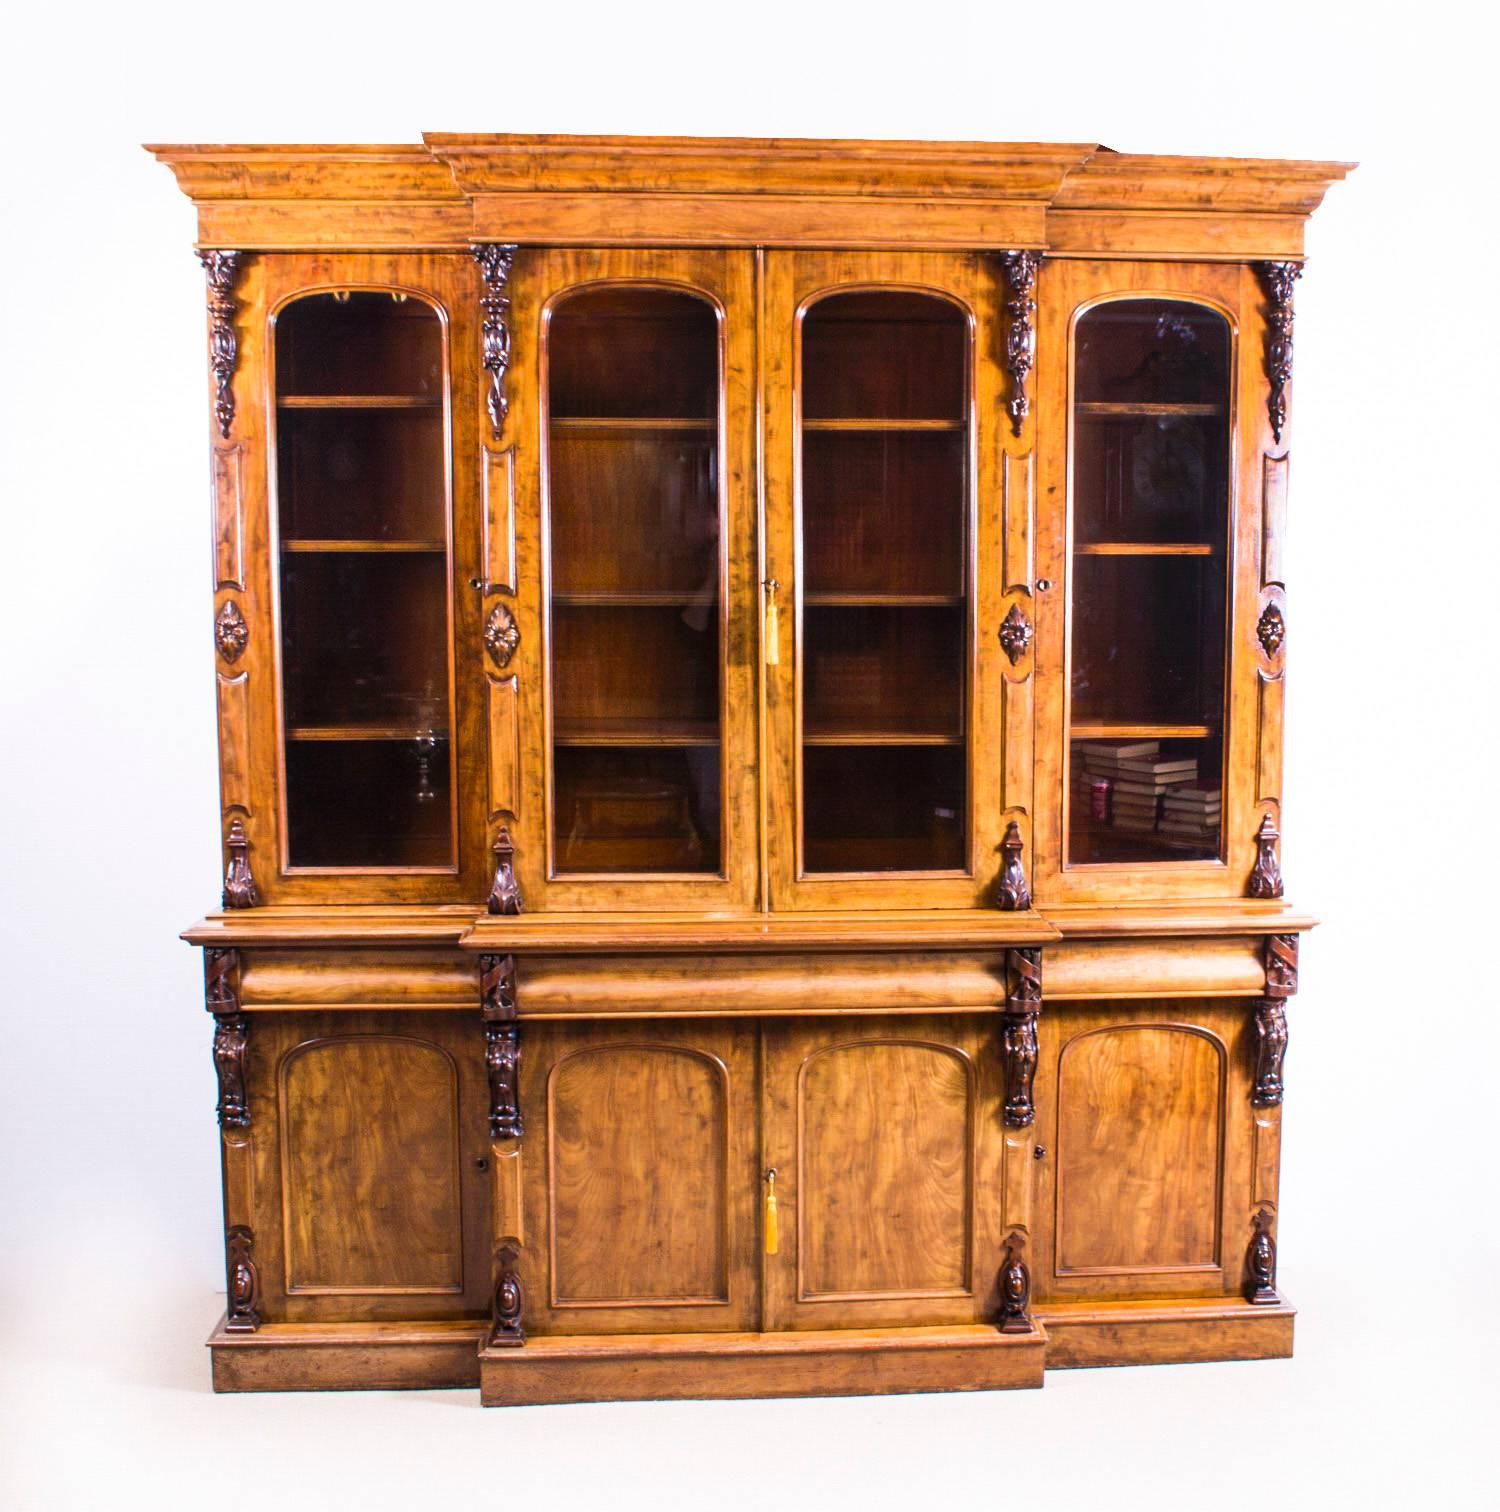 This is a beautiful antique, Victorian Cuban mahogany breakfront library bookcase, masterfully crafted in rich flame mahogany, circa 1860 in date. 

This impressive bookcase features multiple mahogany corbels, panelled doors on the lower cupboards